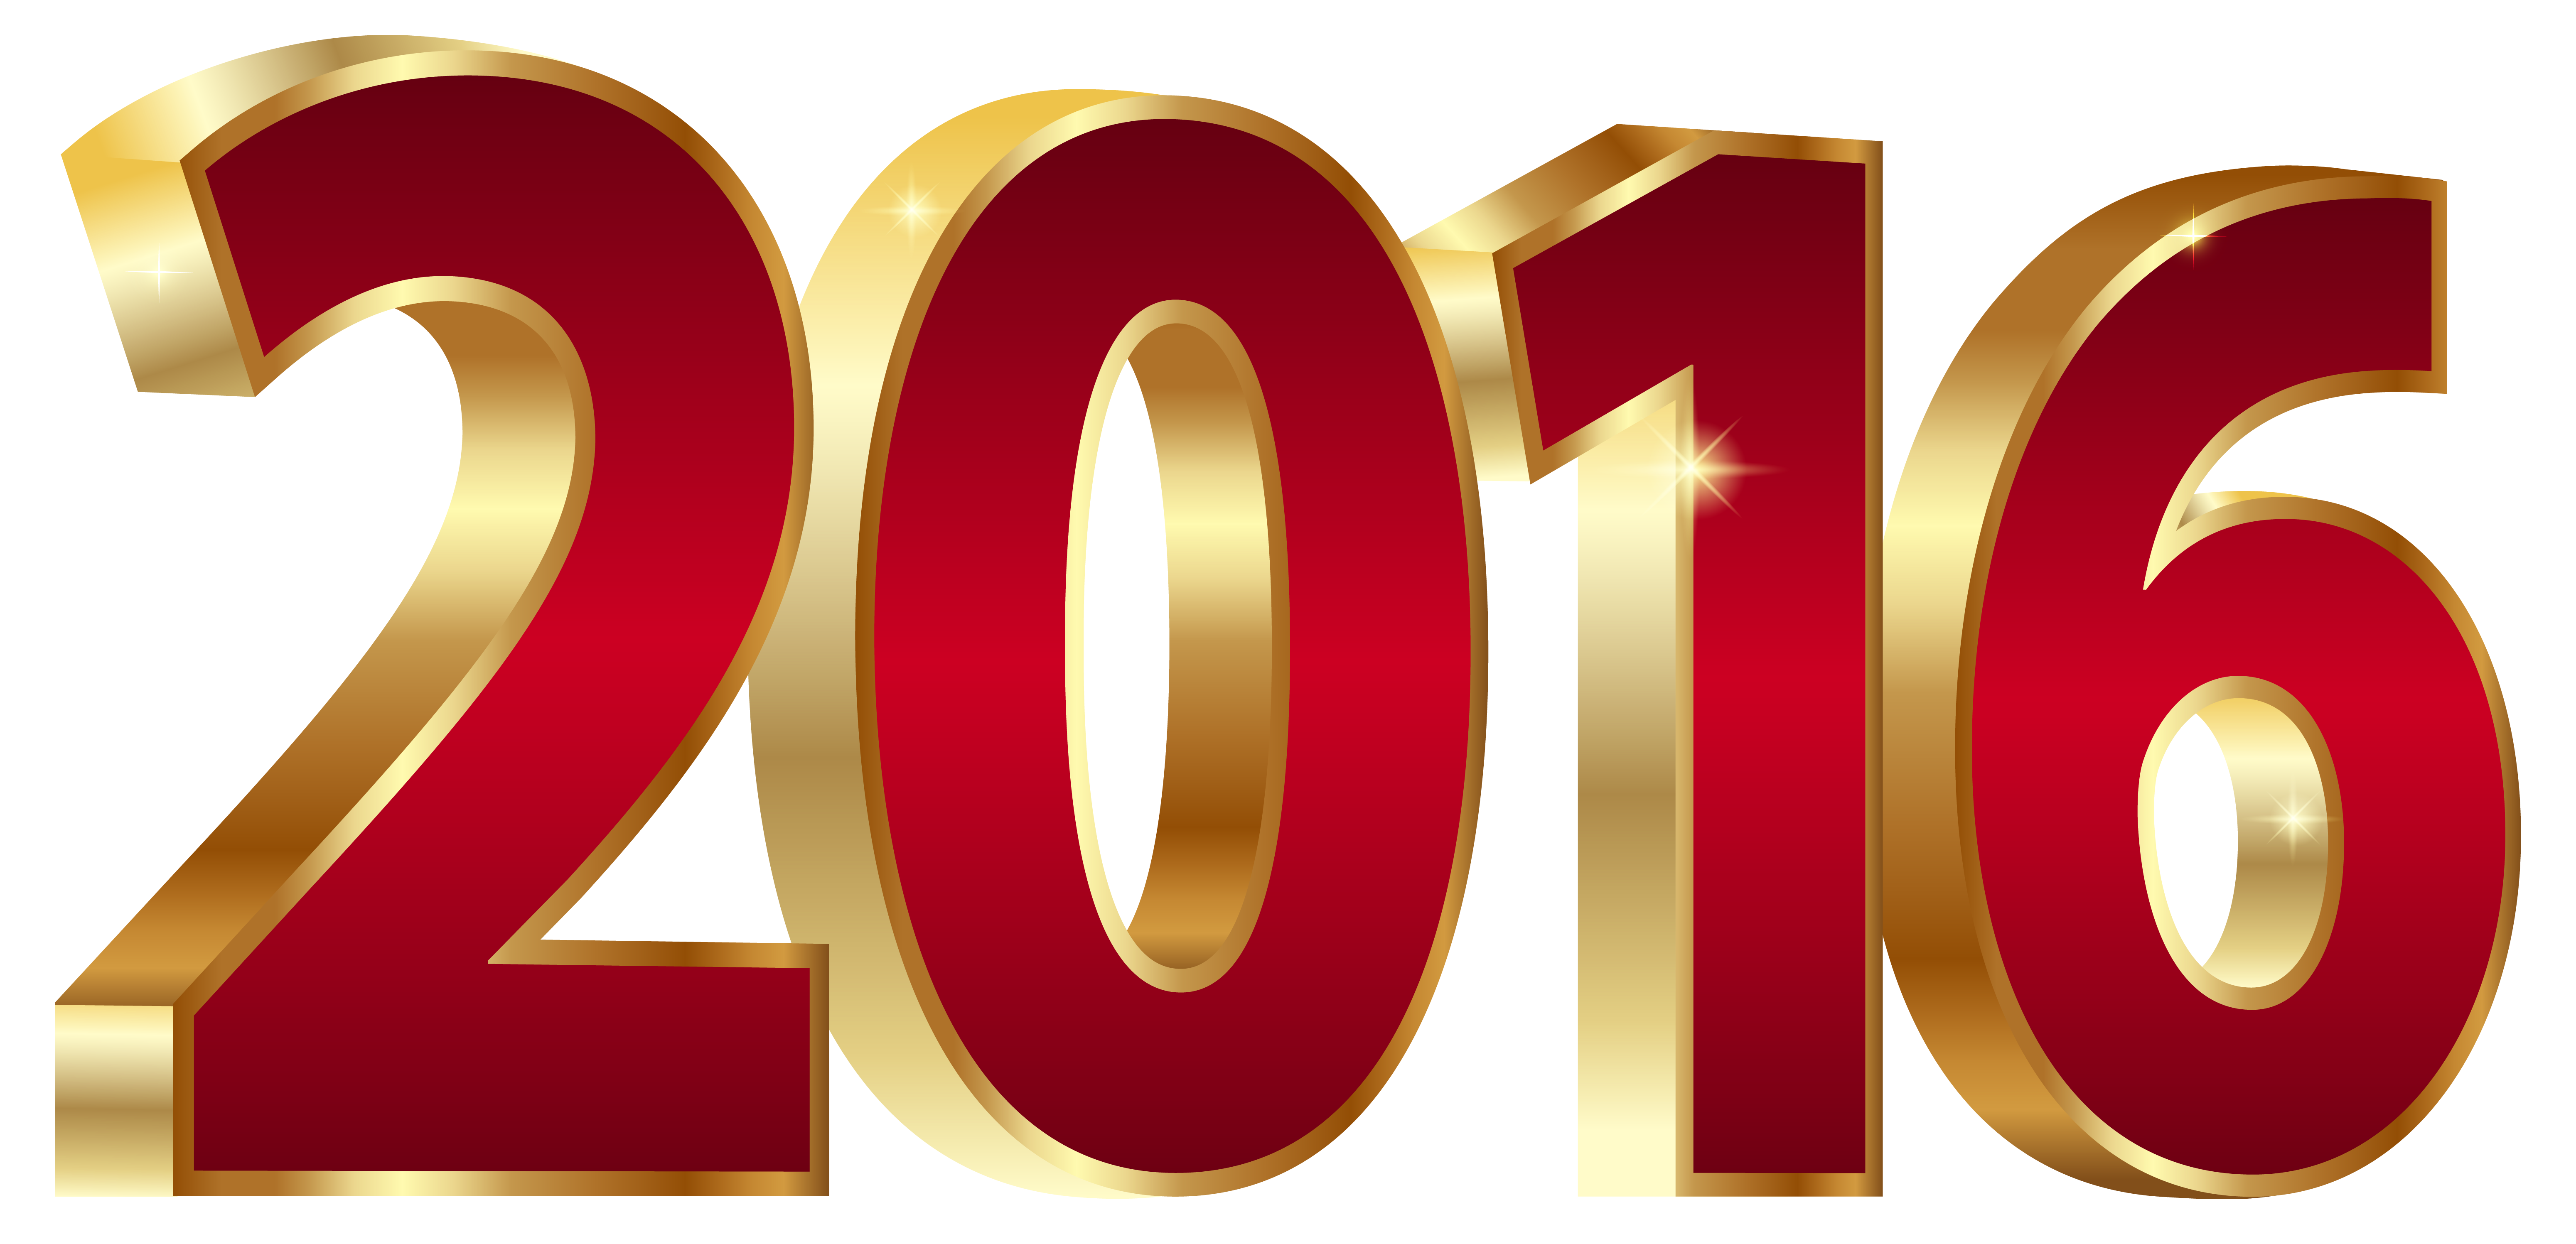 2016 clipart.  gold and red